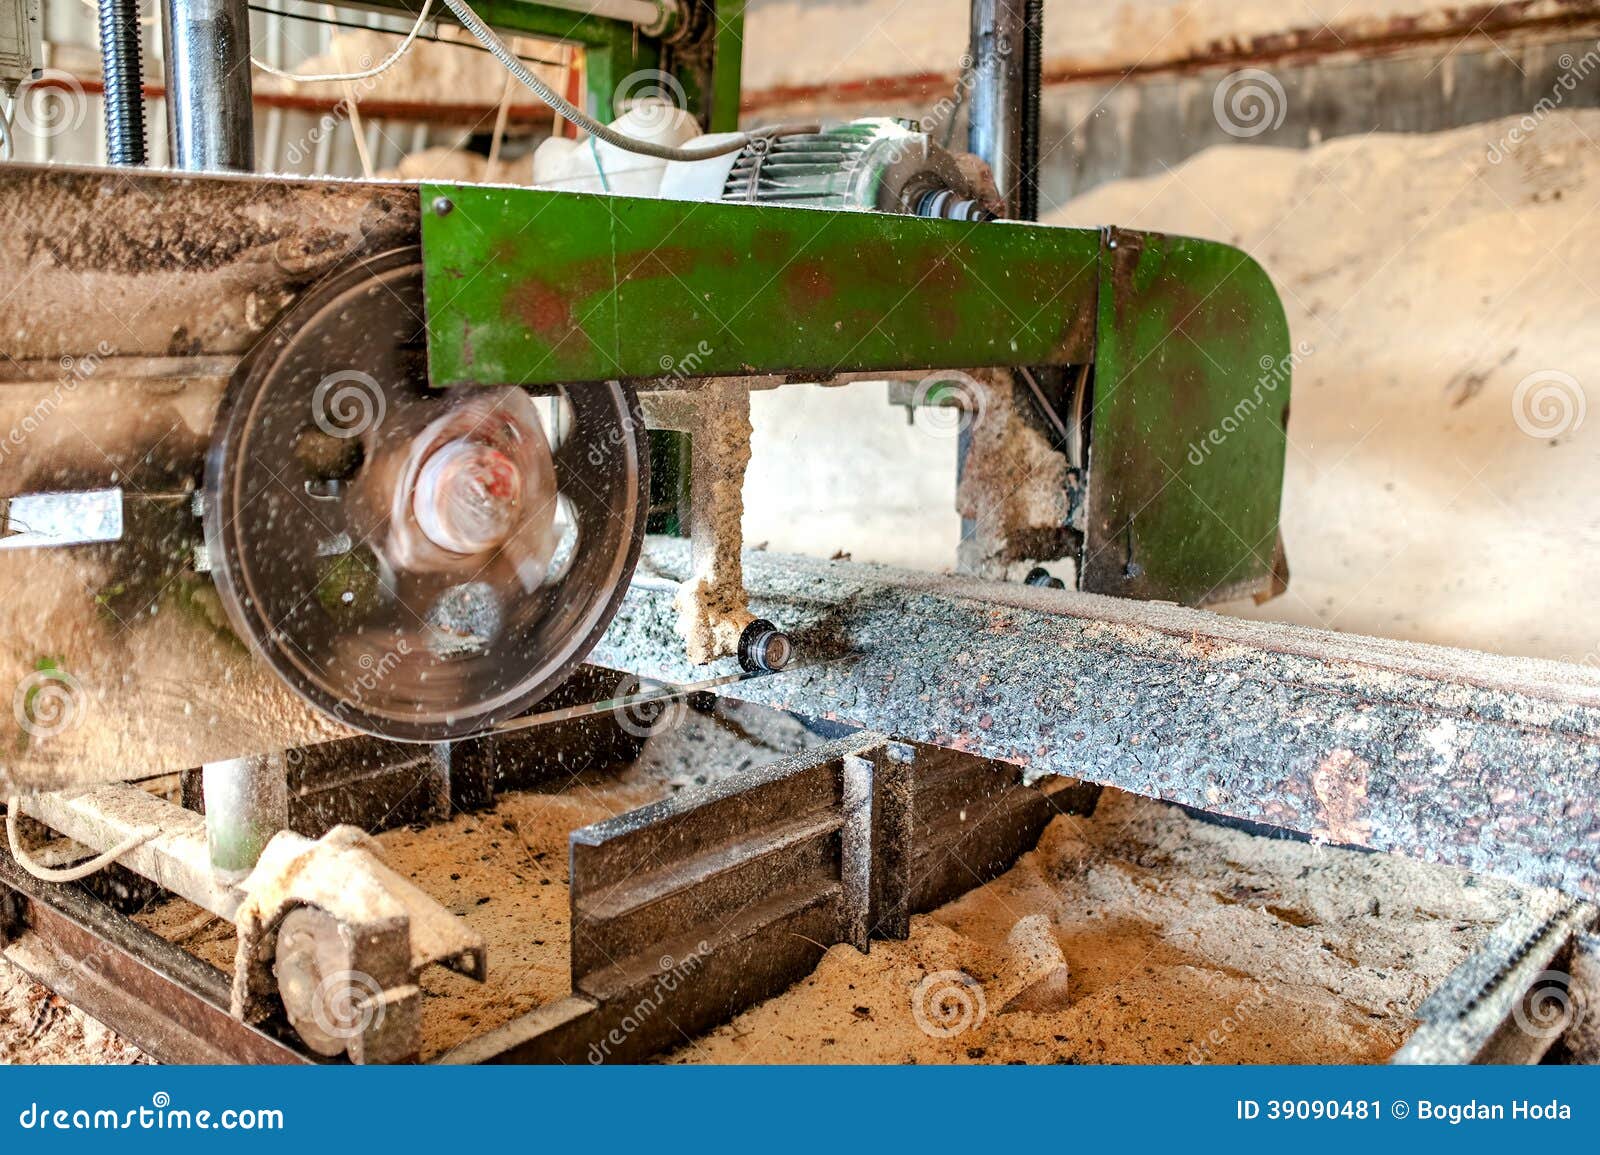  wood production factory - close-up of band saw sawmill cutting wood